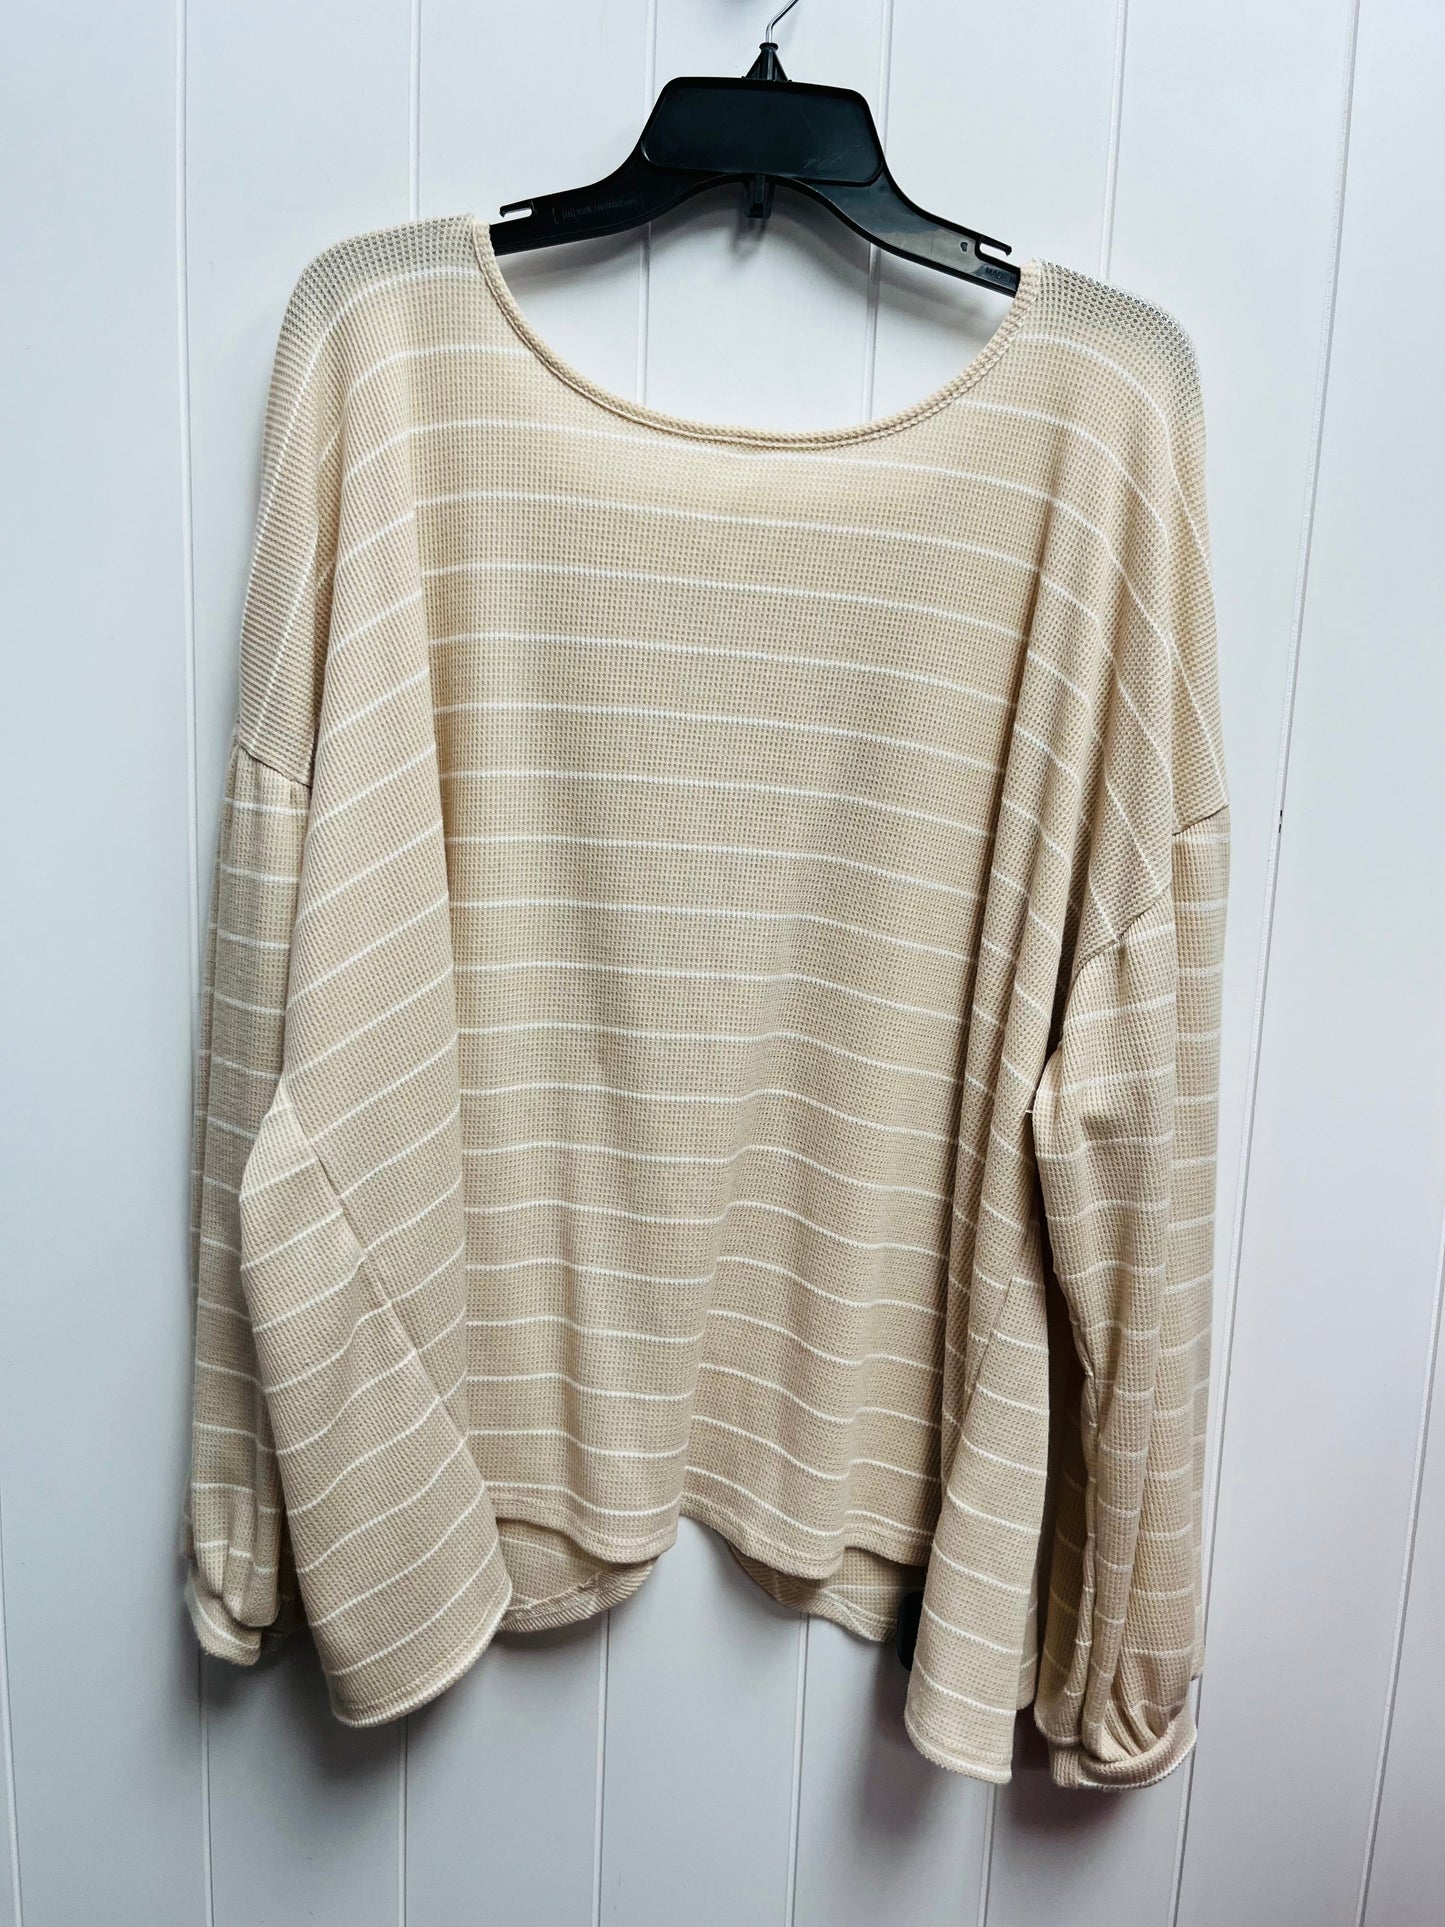 Top Long Sleeve By Ava James  Size: 2x